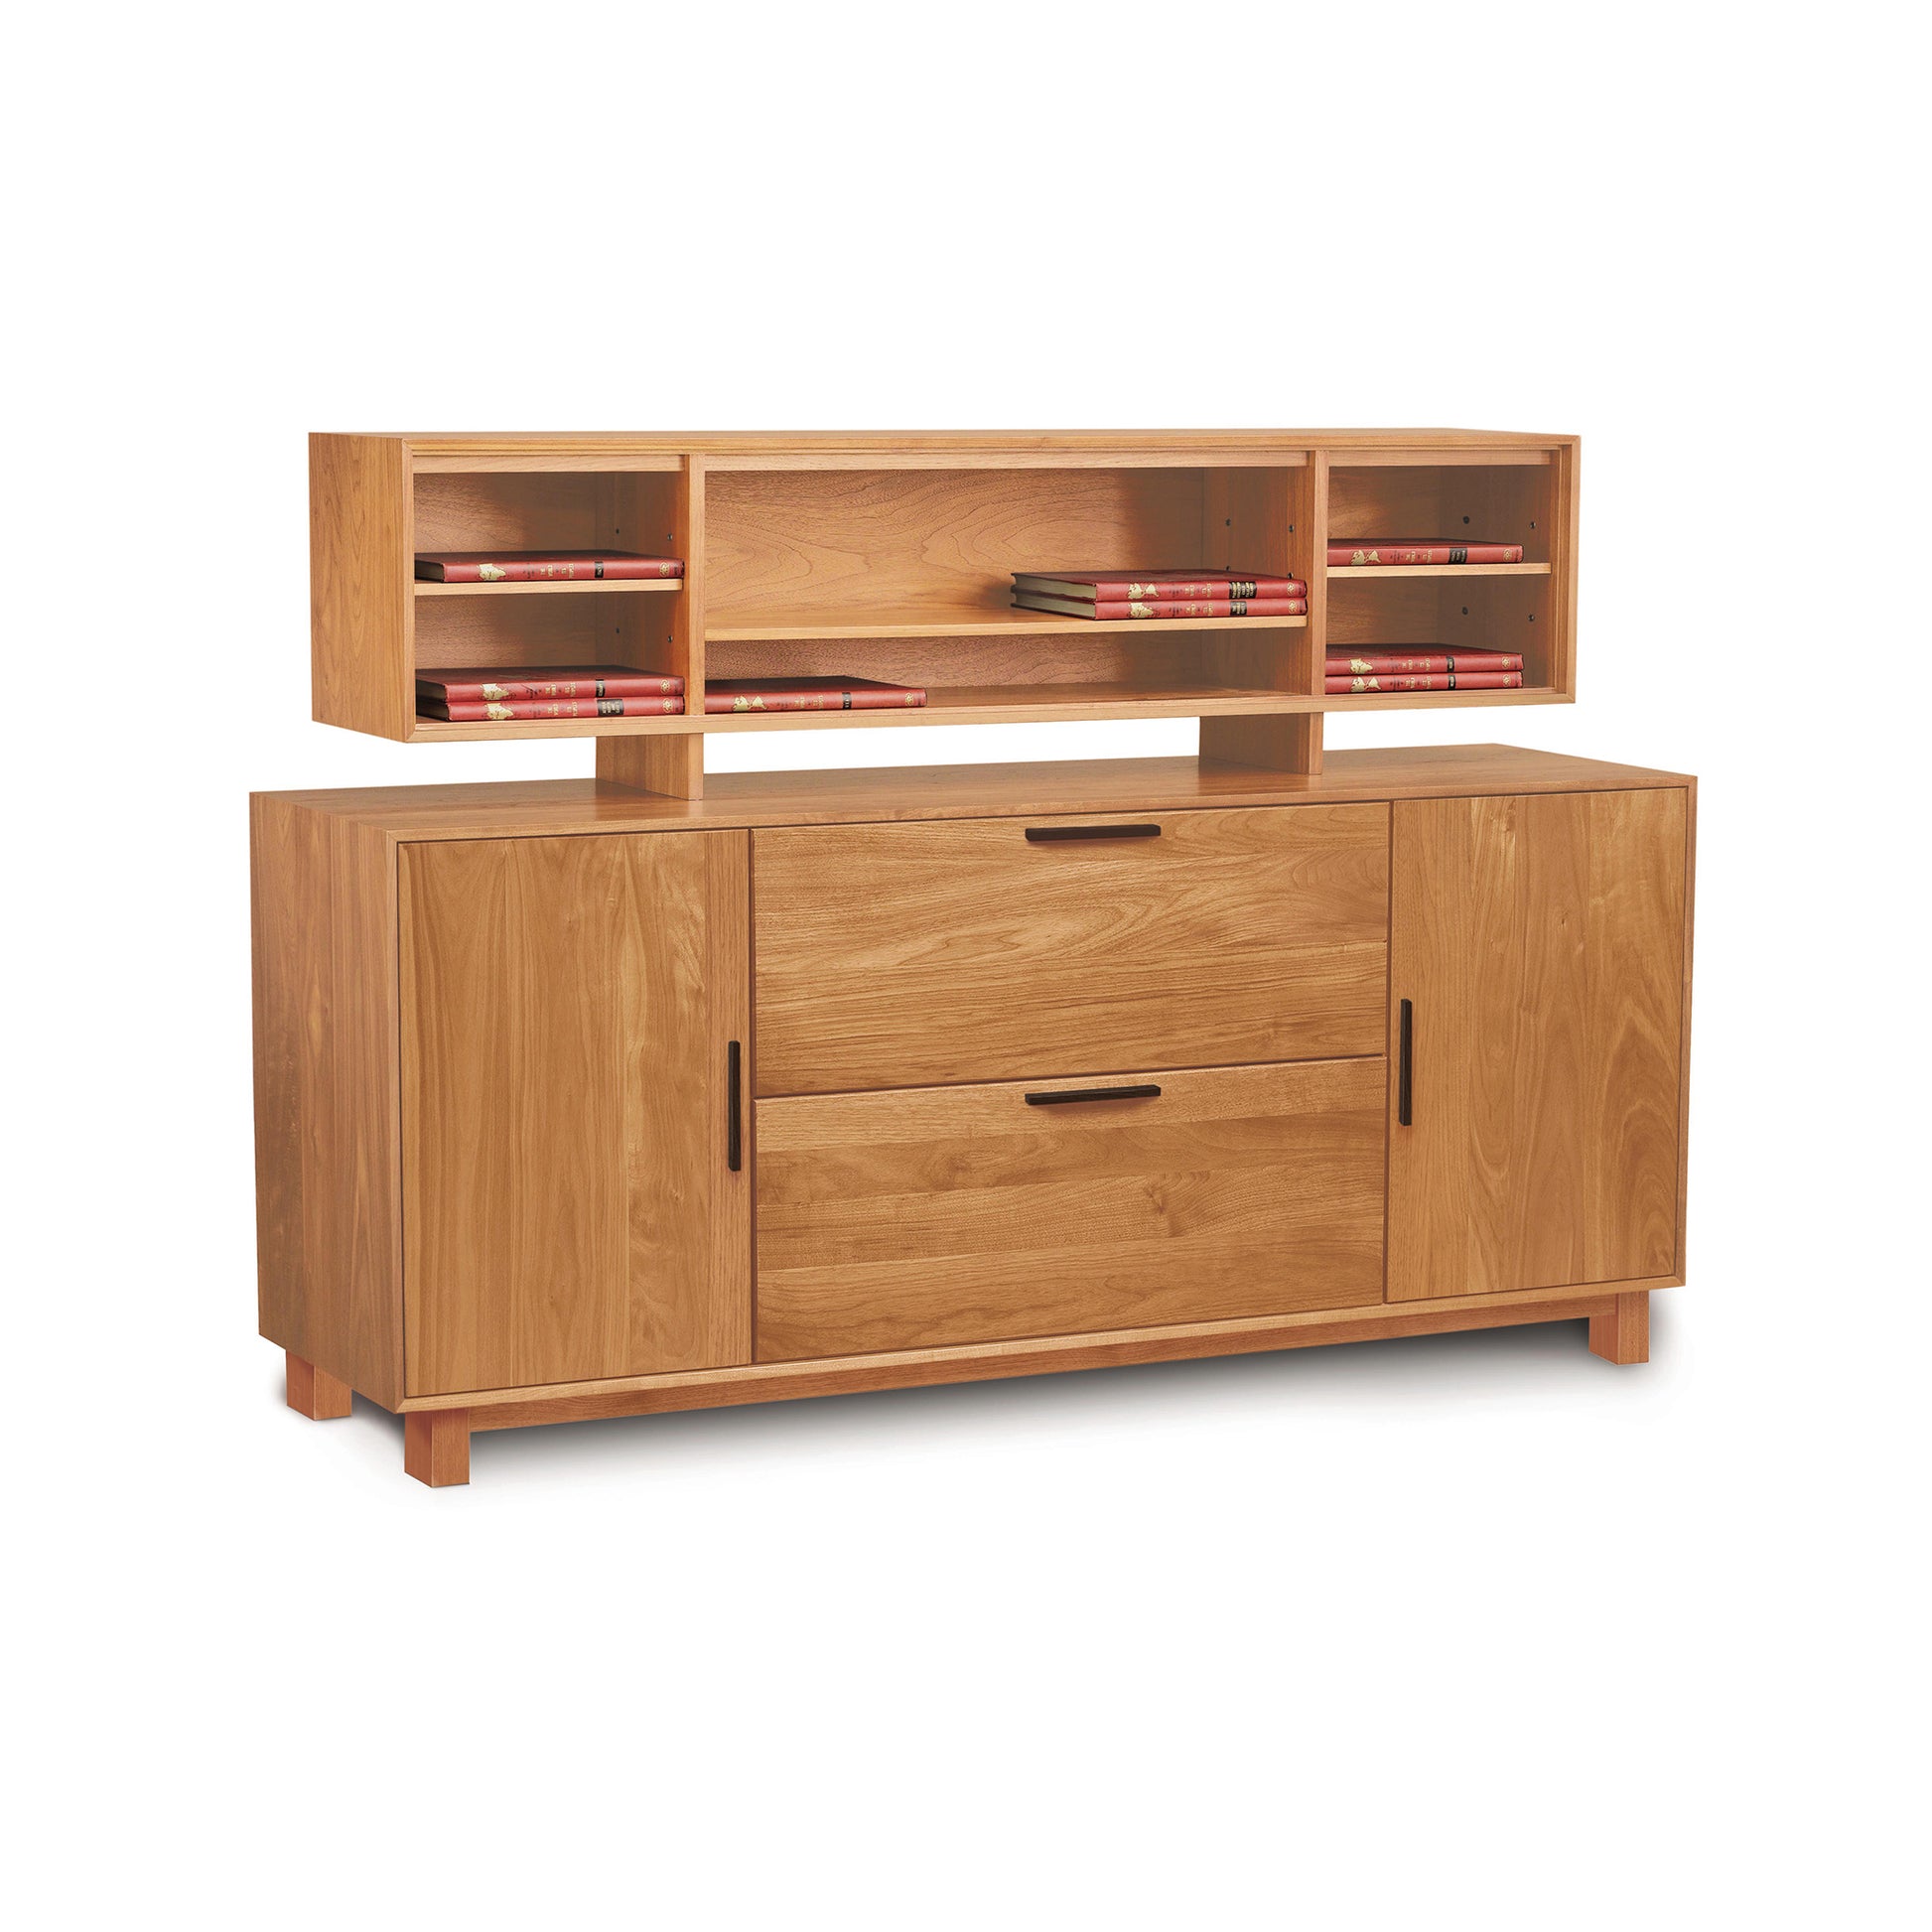 A solid cherry wood Linear Office Credenza with a matching hutch featuring shelves and drawers with red interior accents, isolated on a white background by Copeland Furniture.